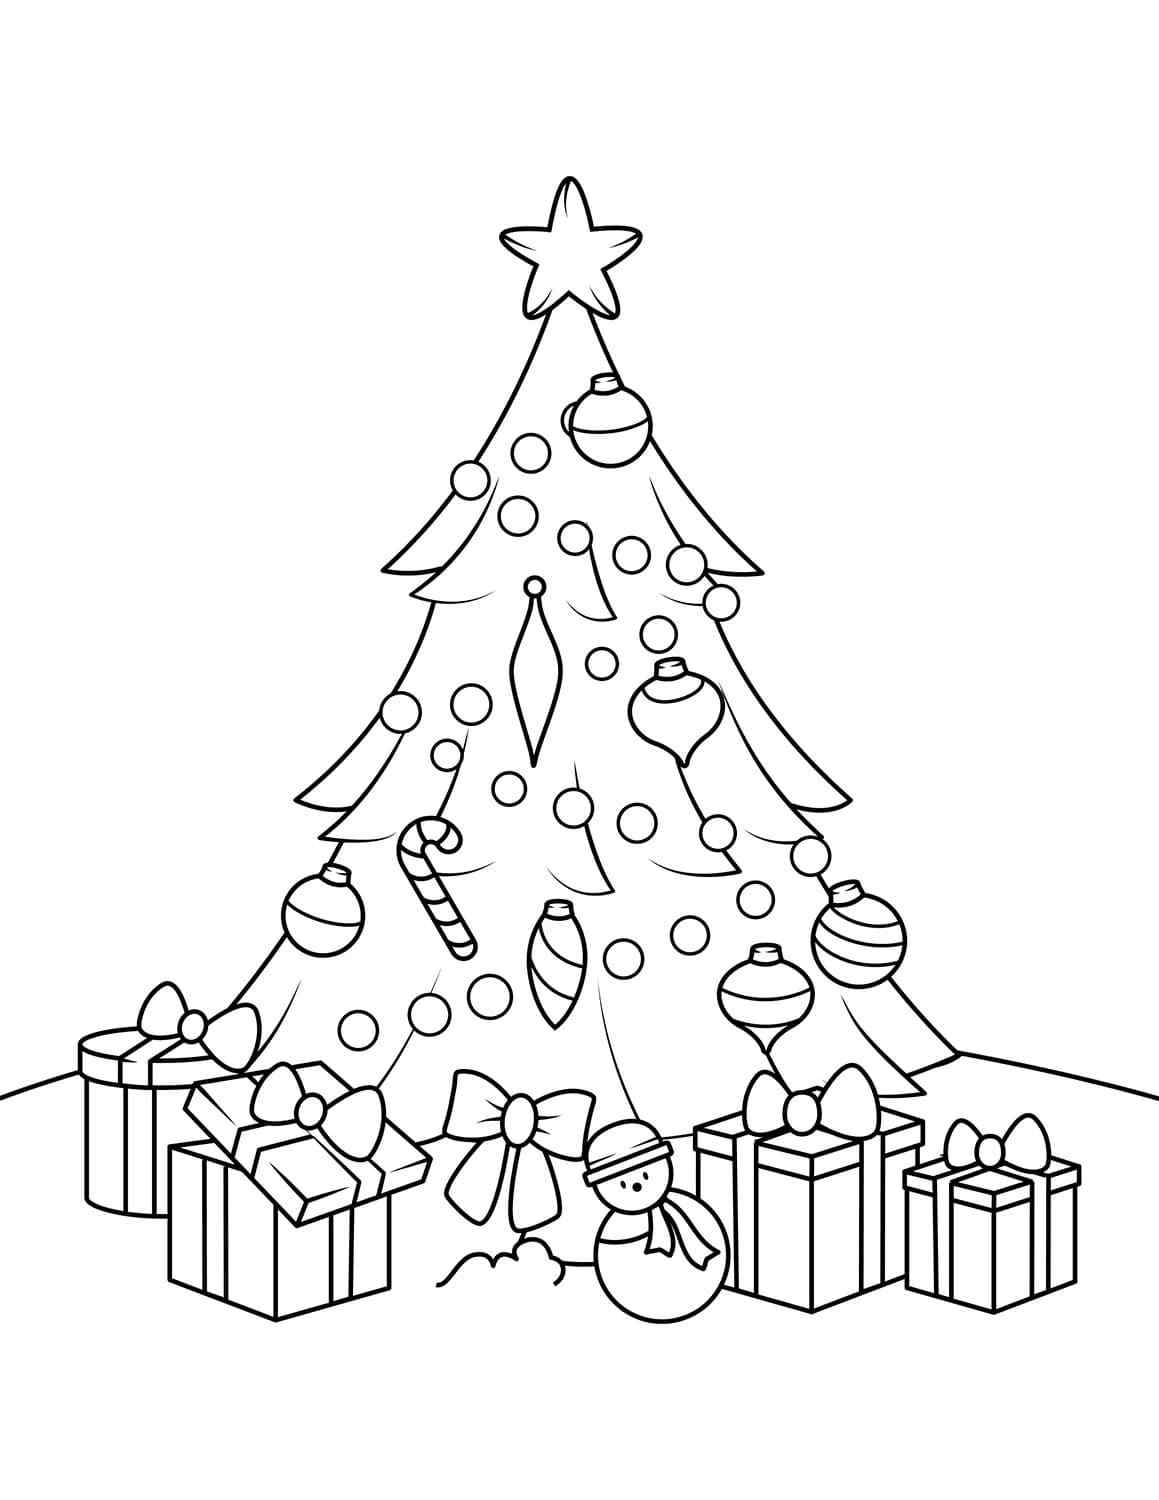 Christmas Gift Is To Put Gifts Under The Tree Coloring Page